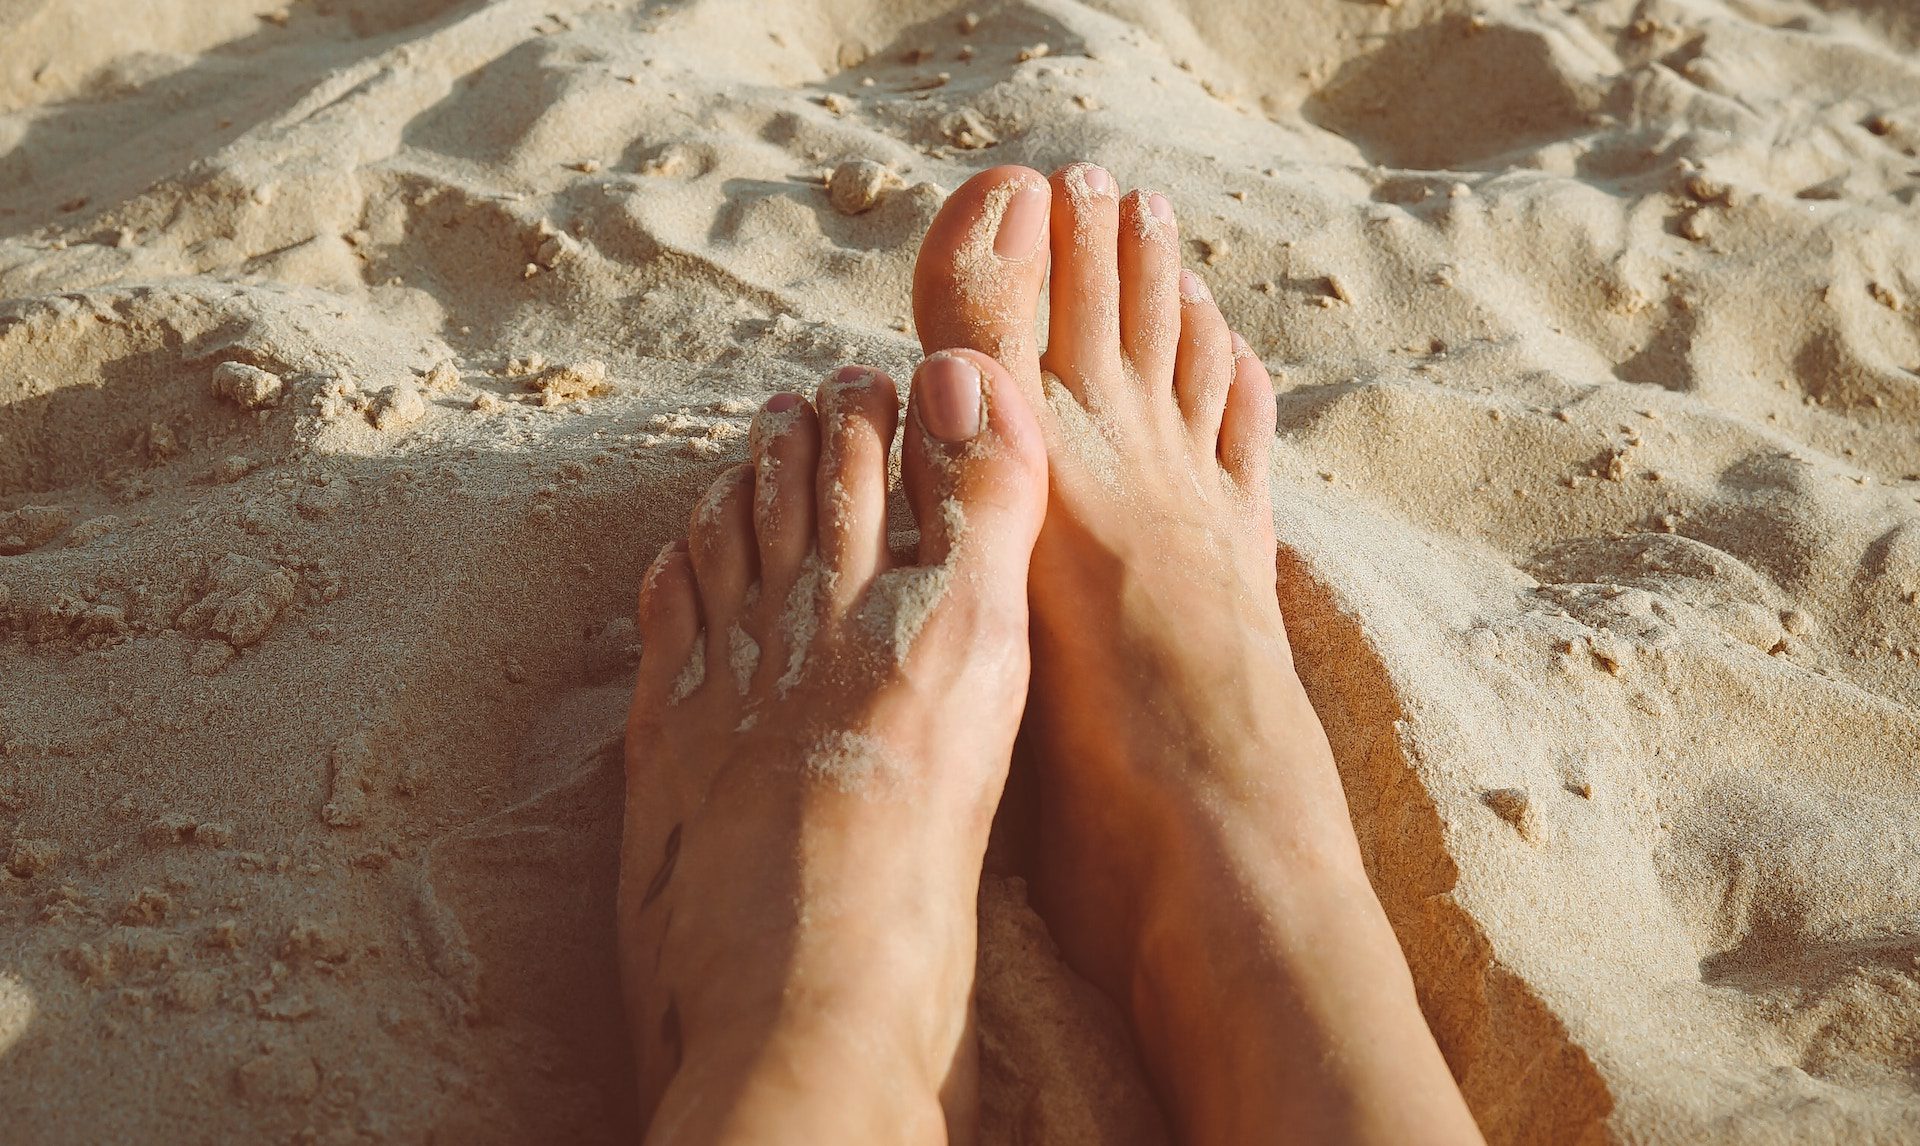 Numbness In Your Toes: What Does it Mean? - Beauchamp Foot Care